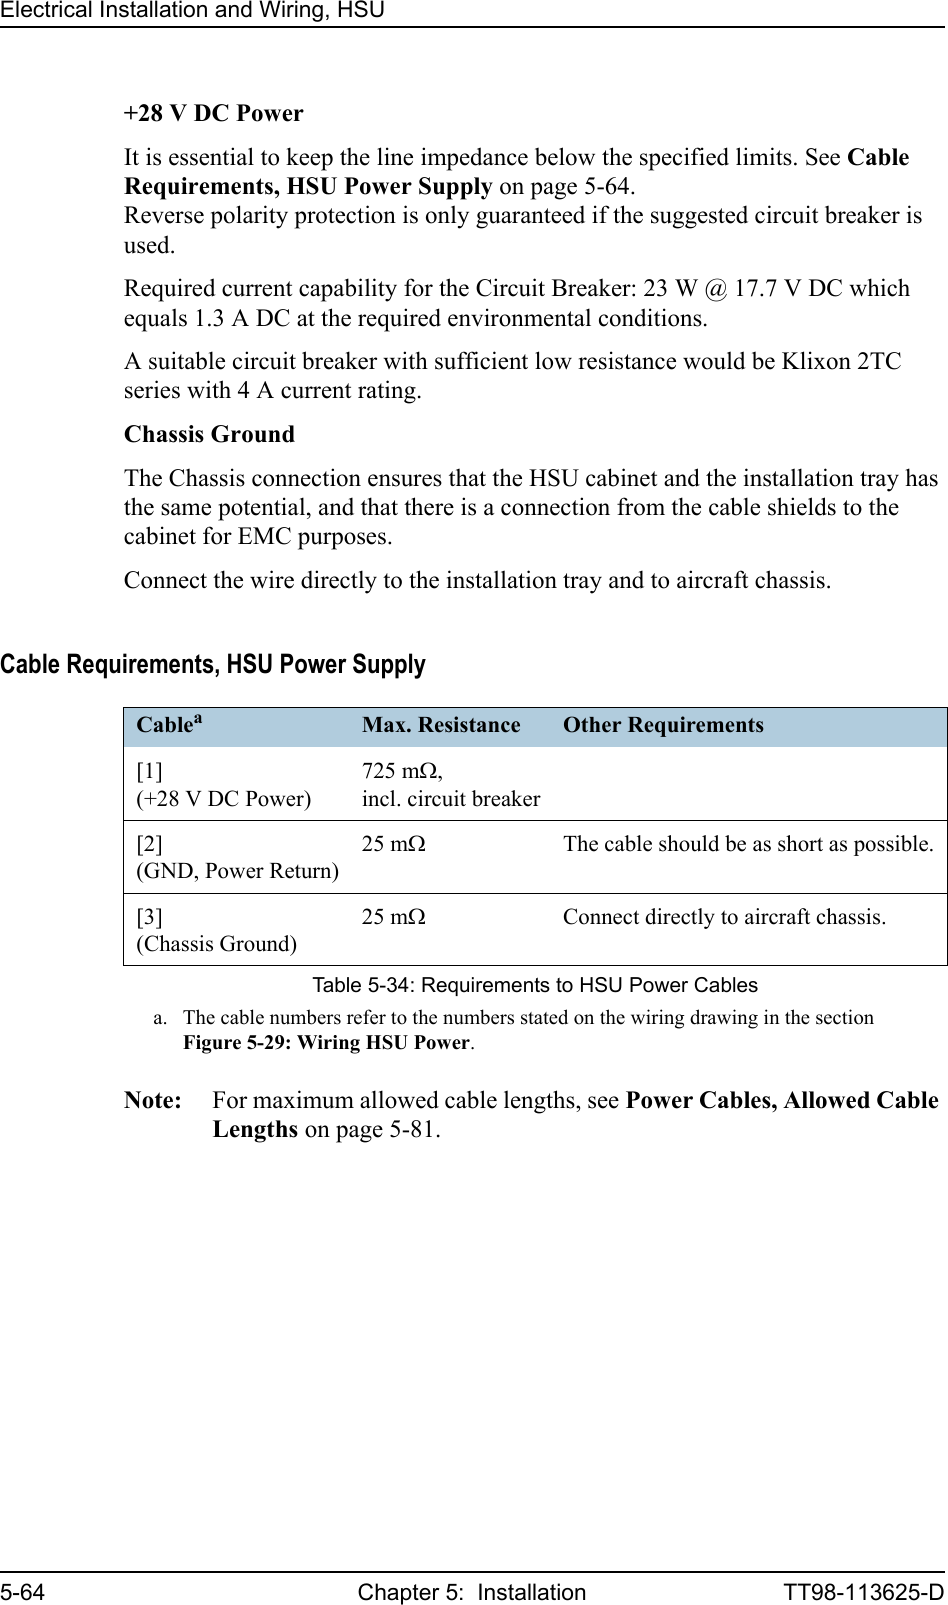 Electrical Installation and Wiring, HSU5-64 Chapter 5:  Installation TT98-113625-D+28 V DC PowerIt is essential to keep the line impedance below the specified limits. See Cable Requirements, HSU Power Supply on page 5-64.Reverse polarity protection is only guaranteed if the suggested circuit breaker is used.Required current capability for the Circuit Breaker: 23 W @ 17.7 V DC which equals 1.3 A DC at the required environmental conditions.A suitable circuit breaker with sufficient low resistance would be Klixon 2TC series with 4 A current rating.Chassis GroundThe Chassis connection ensures that the HSU cabinet and the installation tray has the same potential, and that there is a connection from the cable shields to the cabinet for EMC purposes.Connect the wire directly to the installation tray and to aircraft chassis.Cable Requirements, HSU Power SupplyNote: For maximum allowed cable lengths, see Power Cables, Allowed Cable Lengths on page 5-81.Cableaa. The cable numbers refer to the numbers stated on the wiring drawing in the section Figure 5-29: Wiring HSU Power.Max. Resistance Other Requirements[1](+28 V DC Power)725 mΩ,incl. circuit breaker[2](GND, Power Return)25 mΩThe cable should be as short as possible.[3](Chassis Ground)25 mΩConnect directly to aircraft chassis.Table 5-34: Requirements to HSU Power Cables